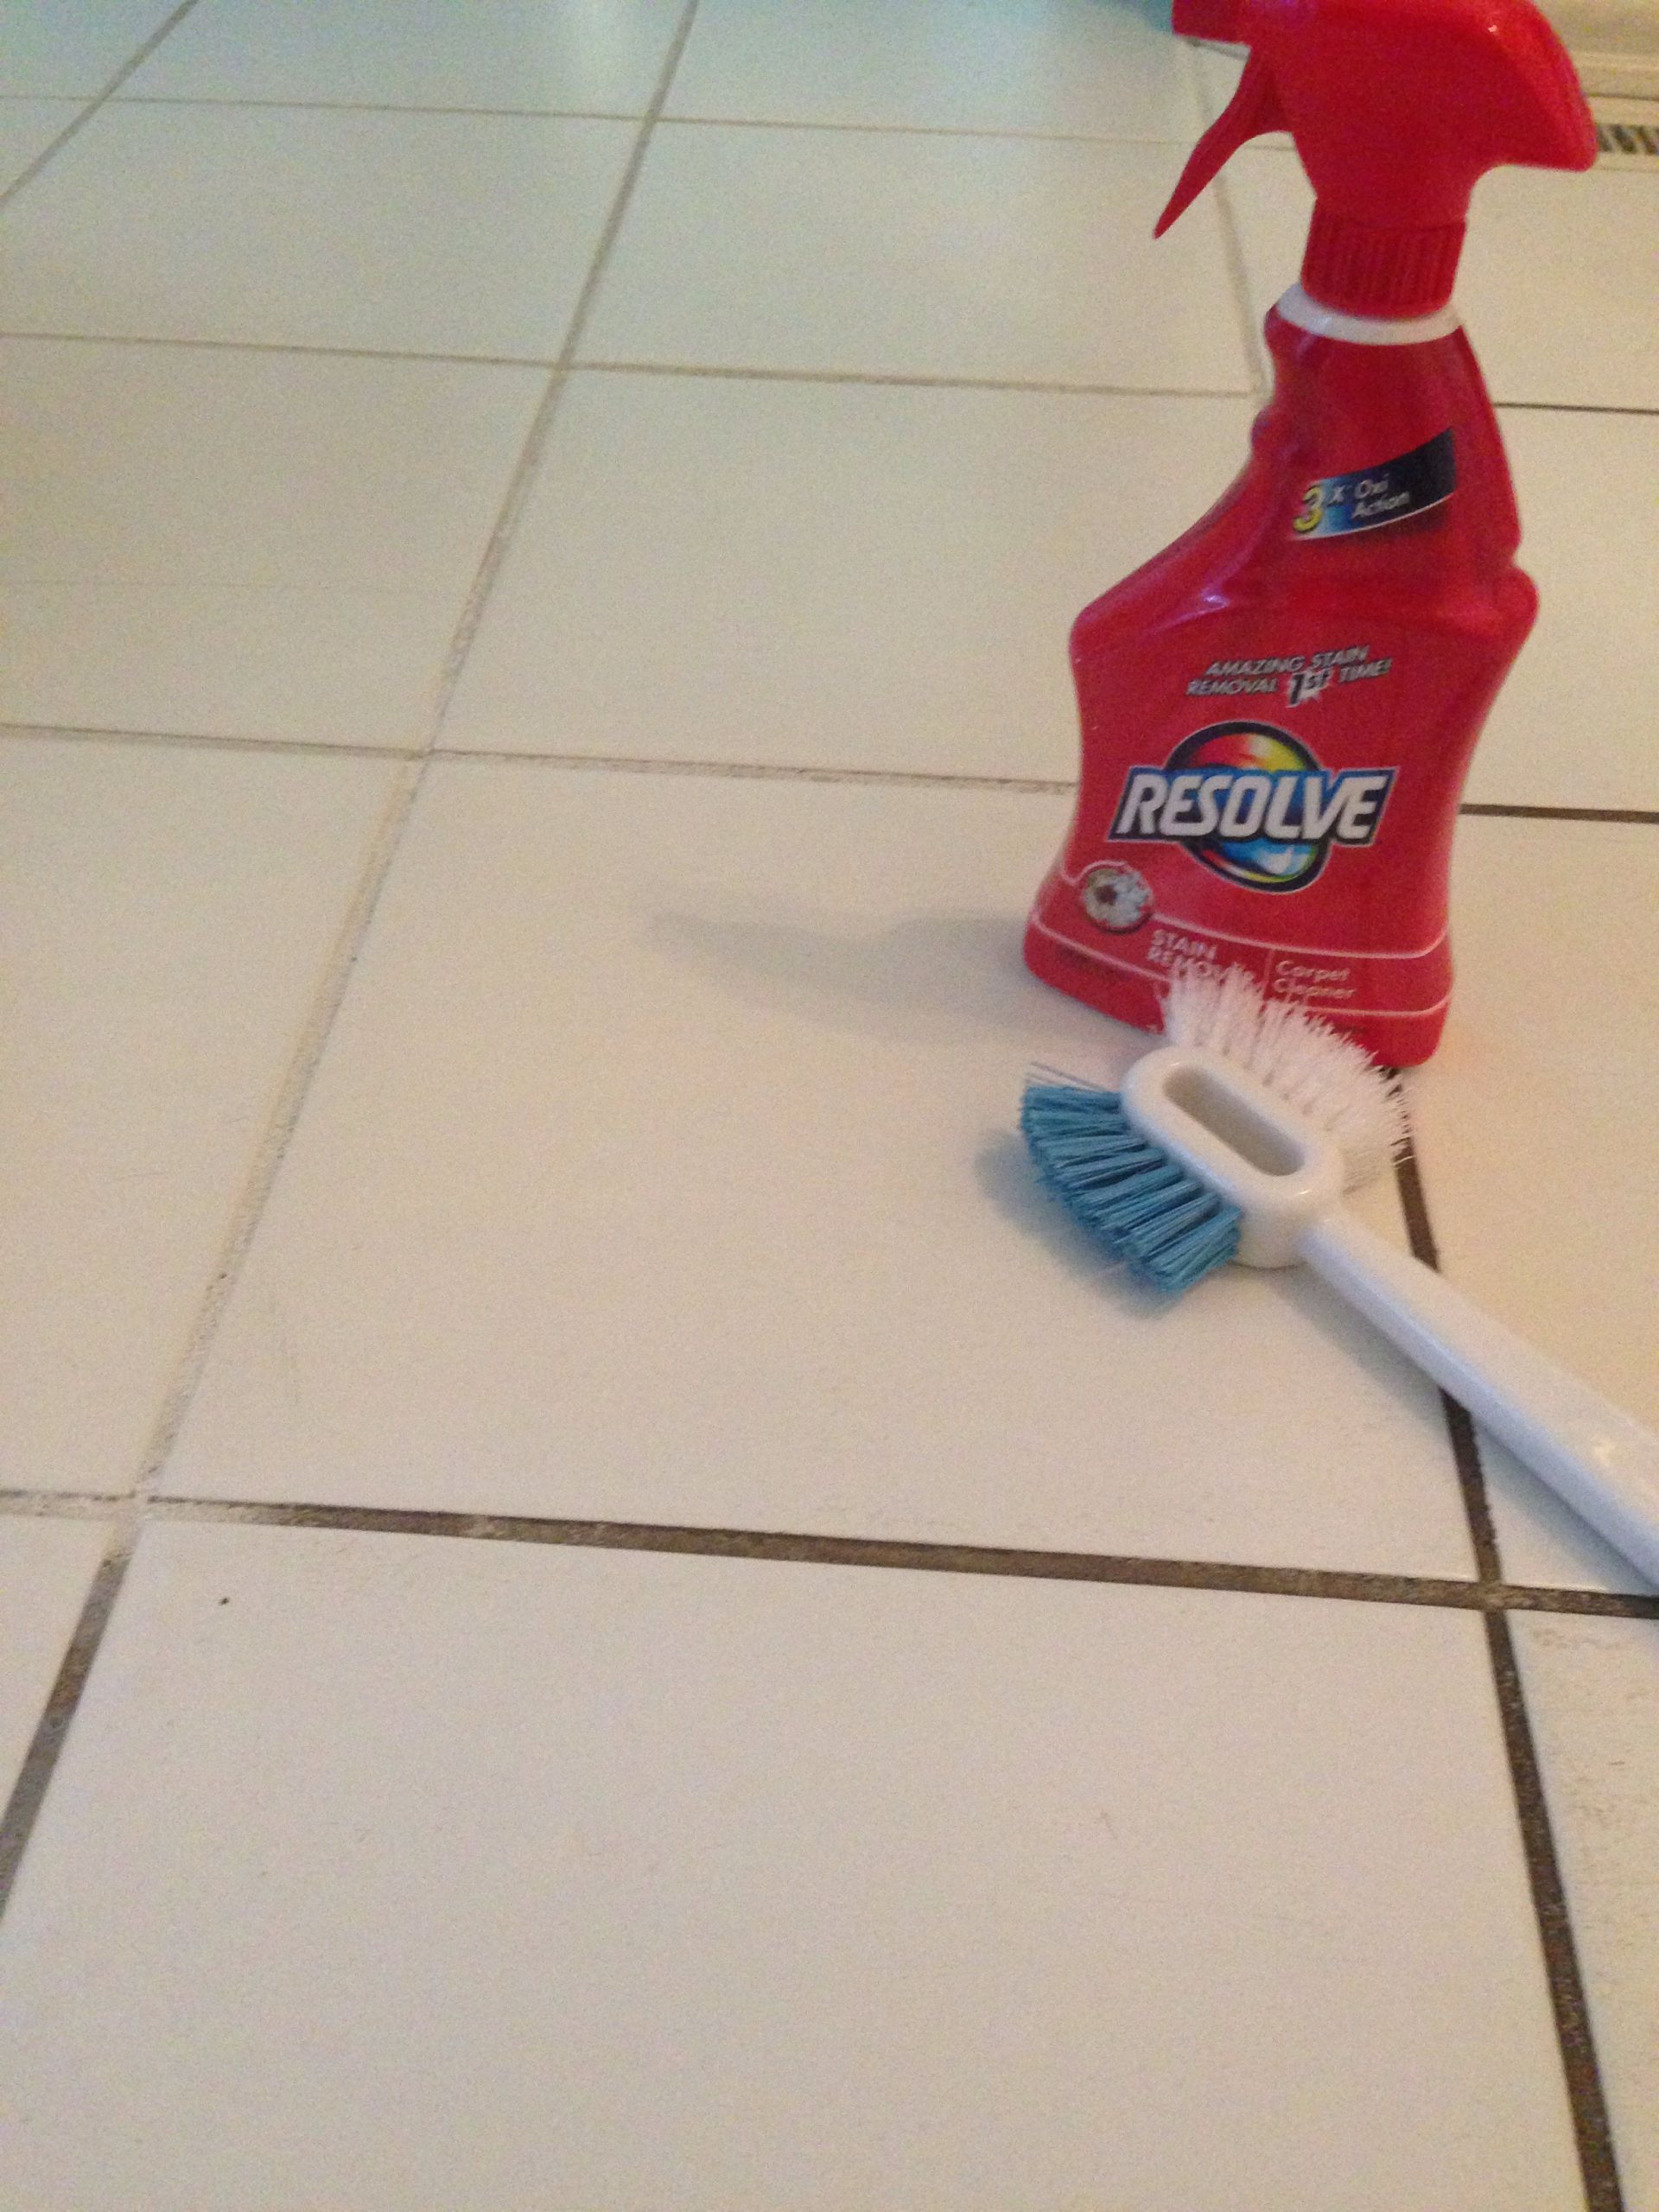 Kitchen Tile Grout Cleaner
 Resolve carpet cleaner to clean grout